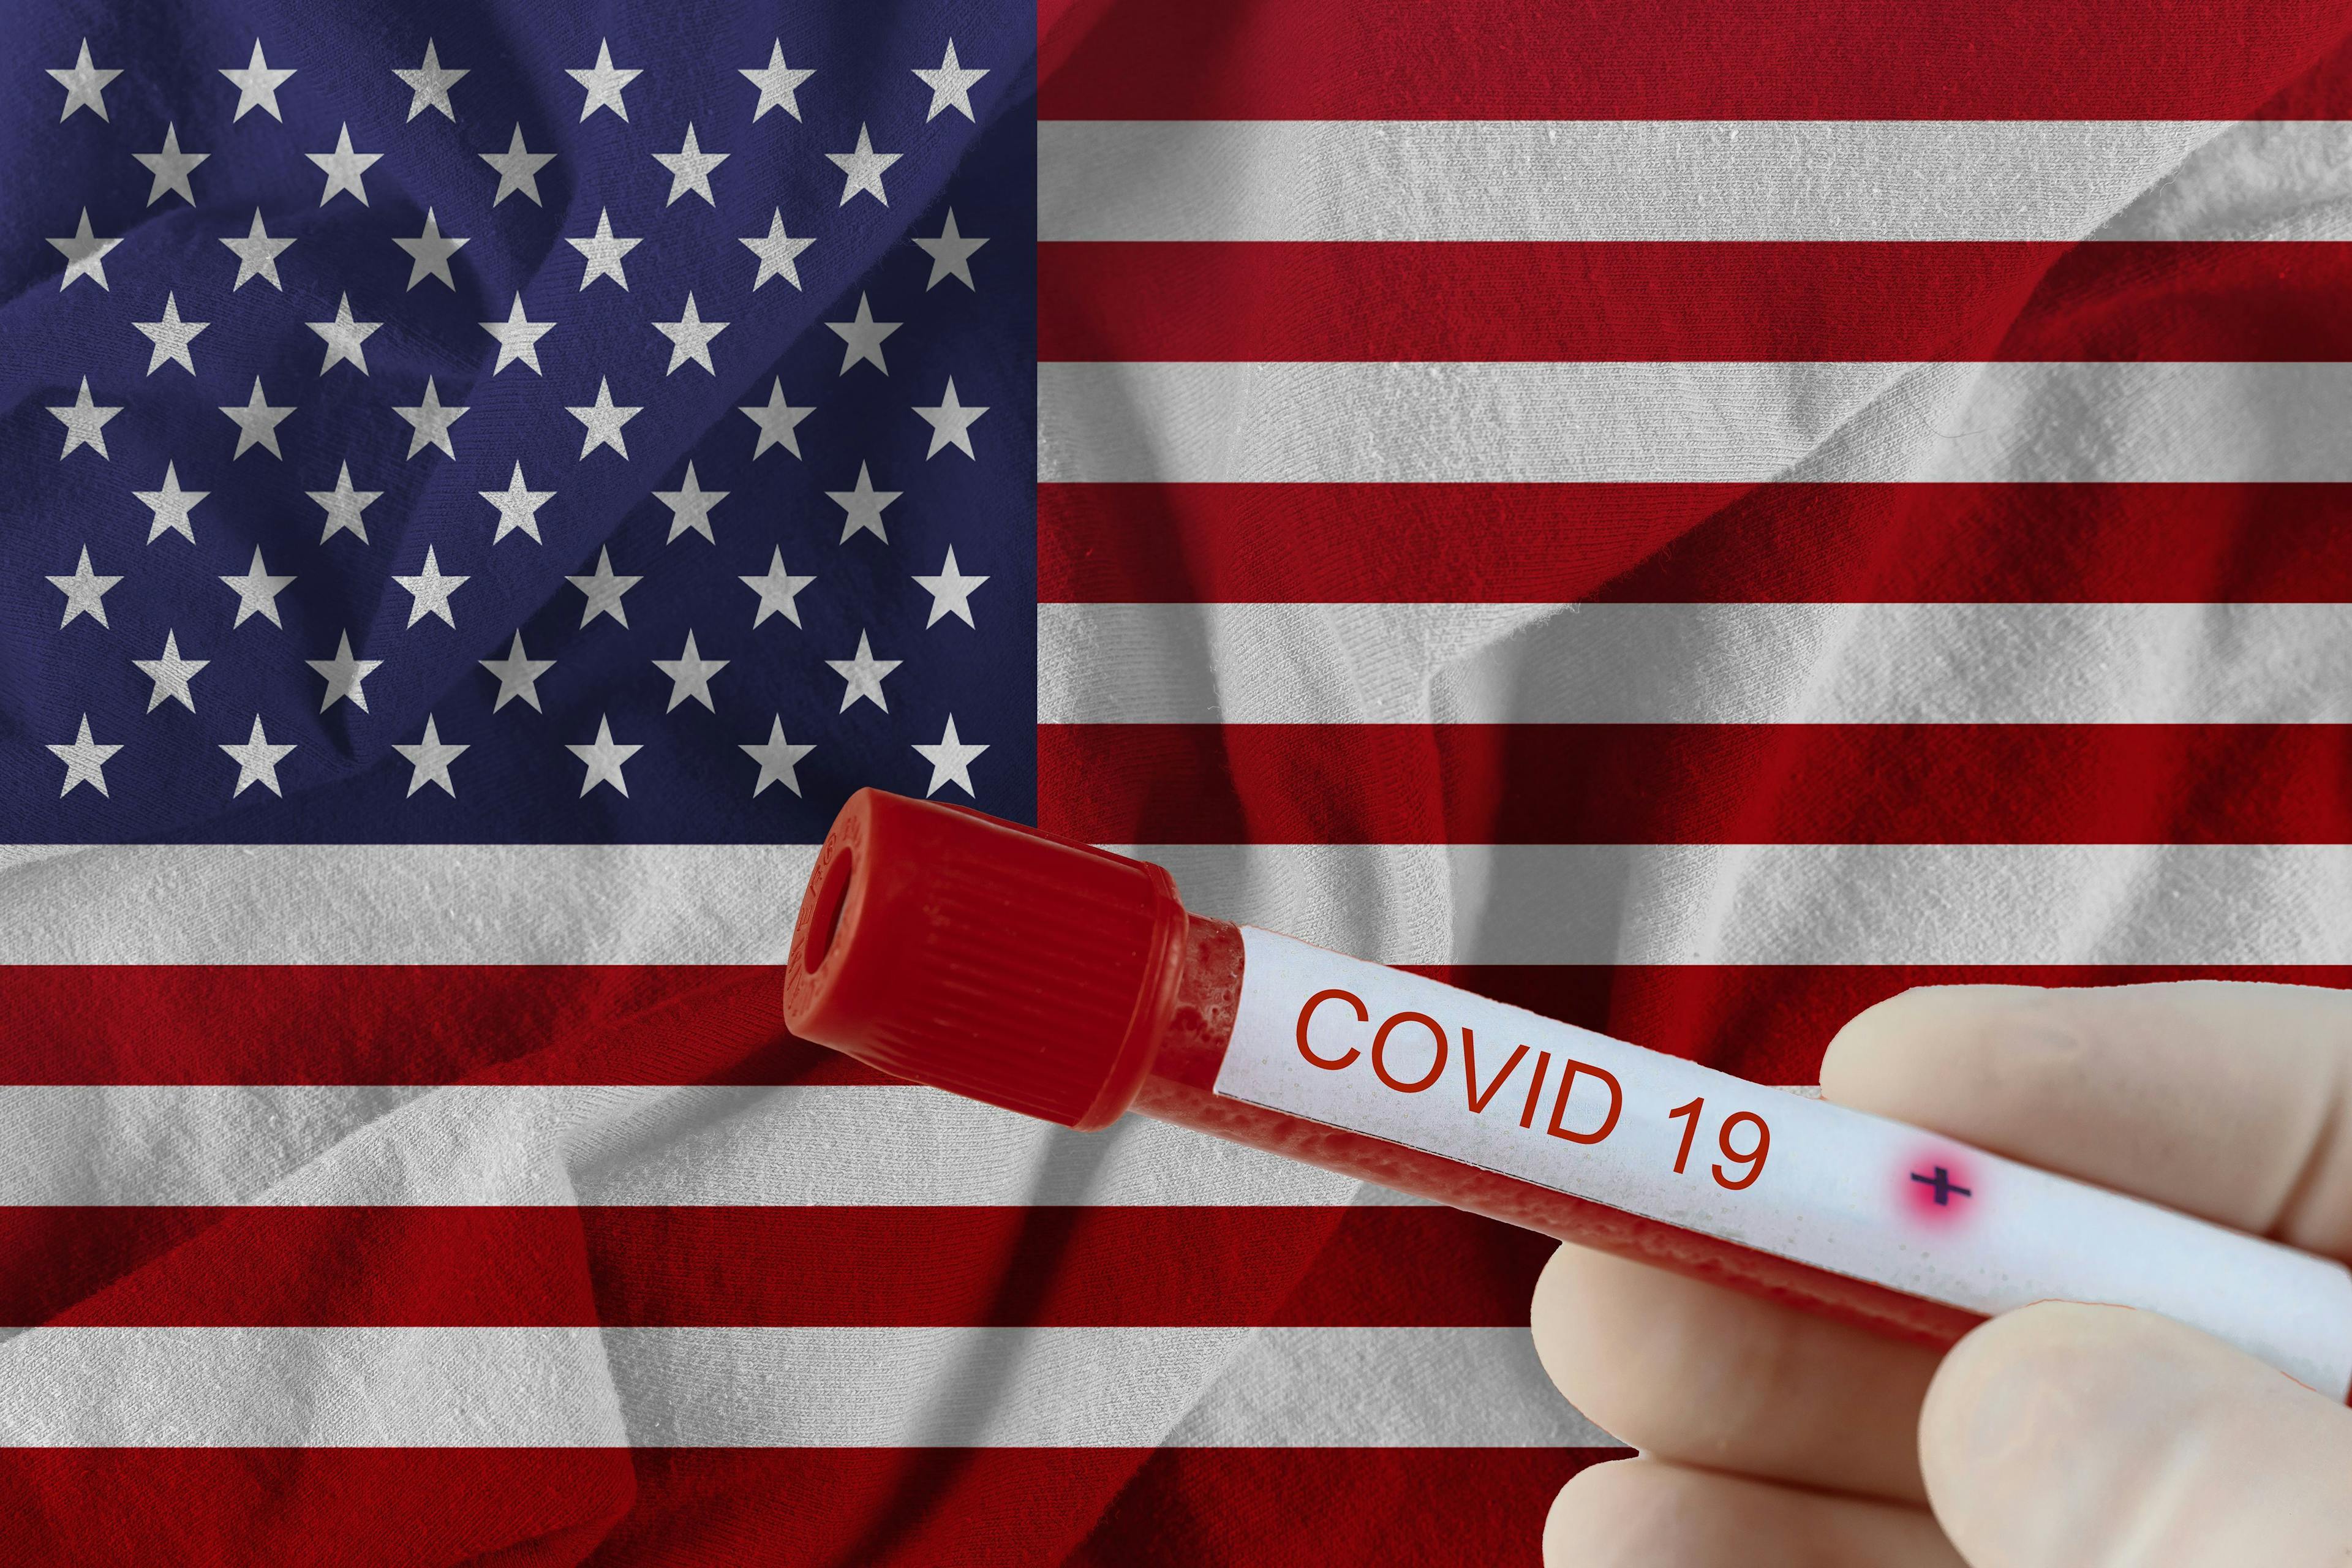 Omicron becomes dominant COVID-19 variant in the U.S.